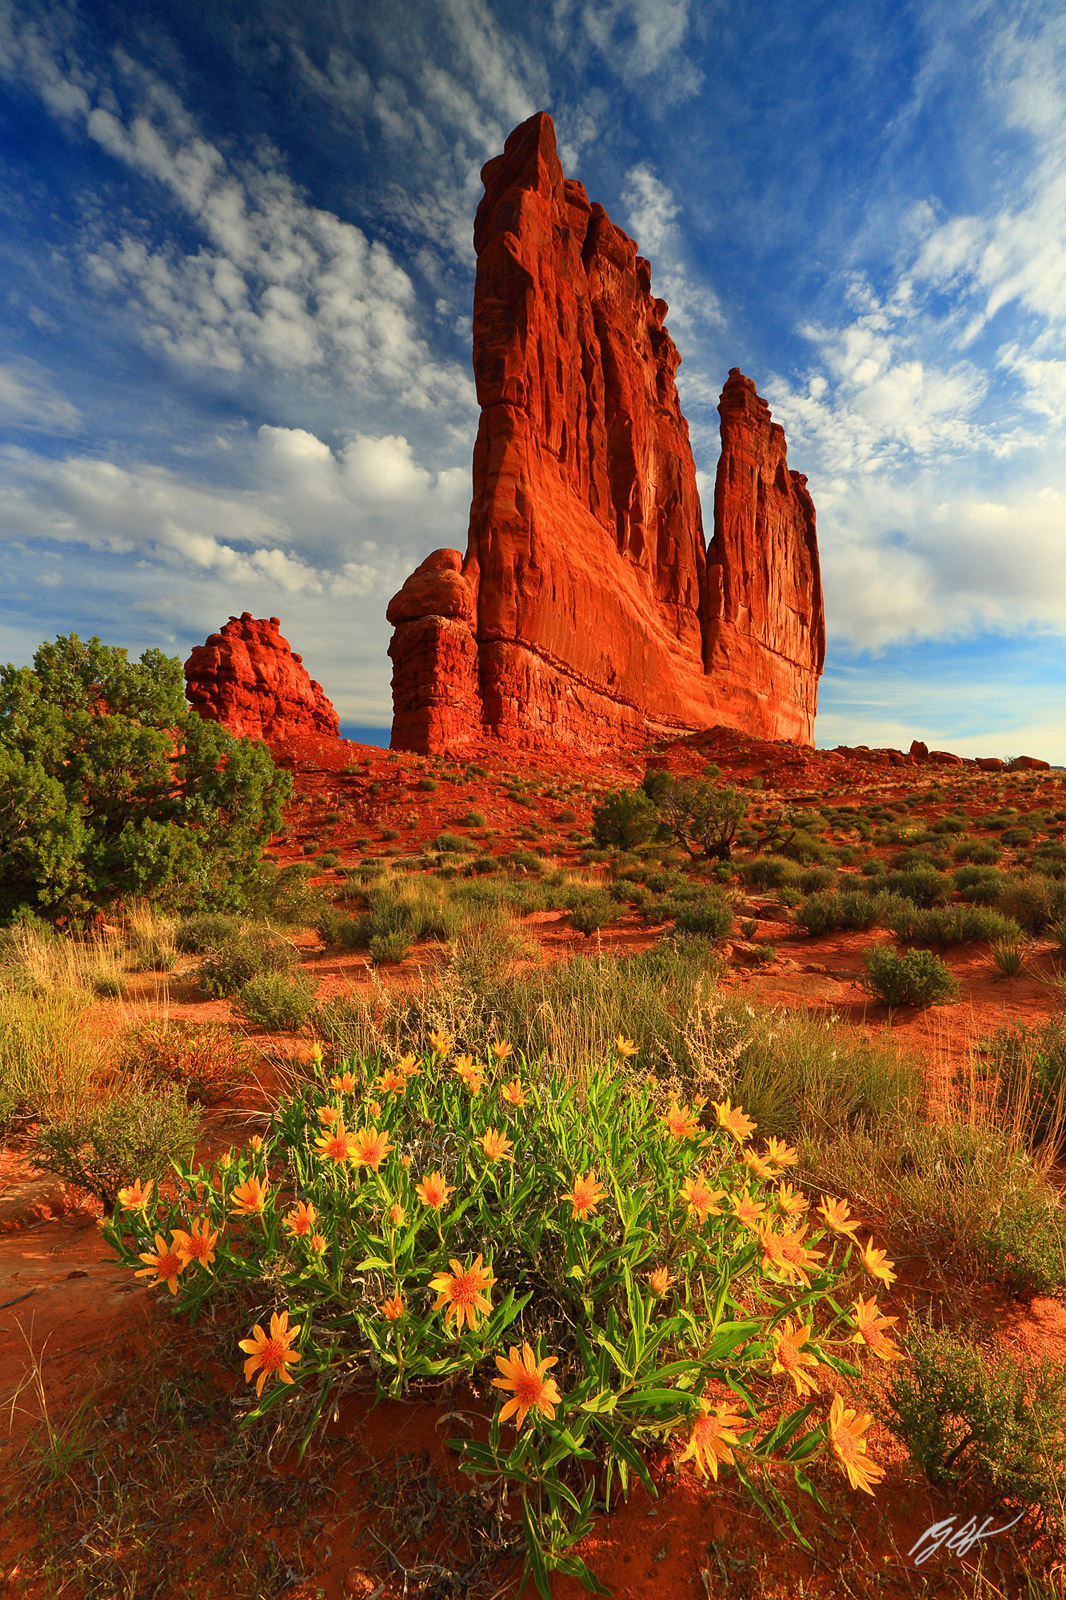 Wildflowers and the Courthouse Towers in Arches National Park in Utah